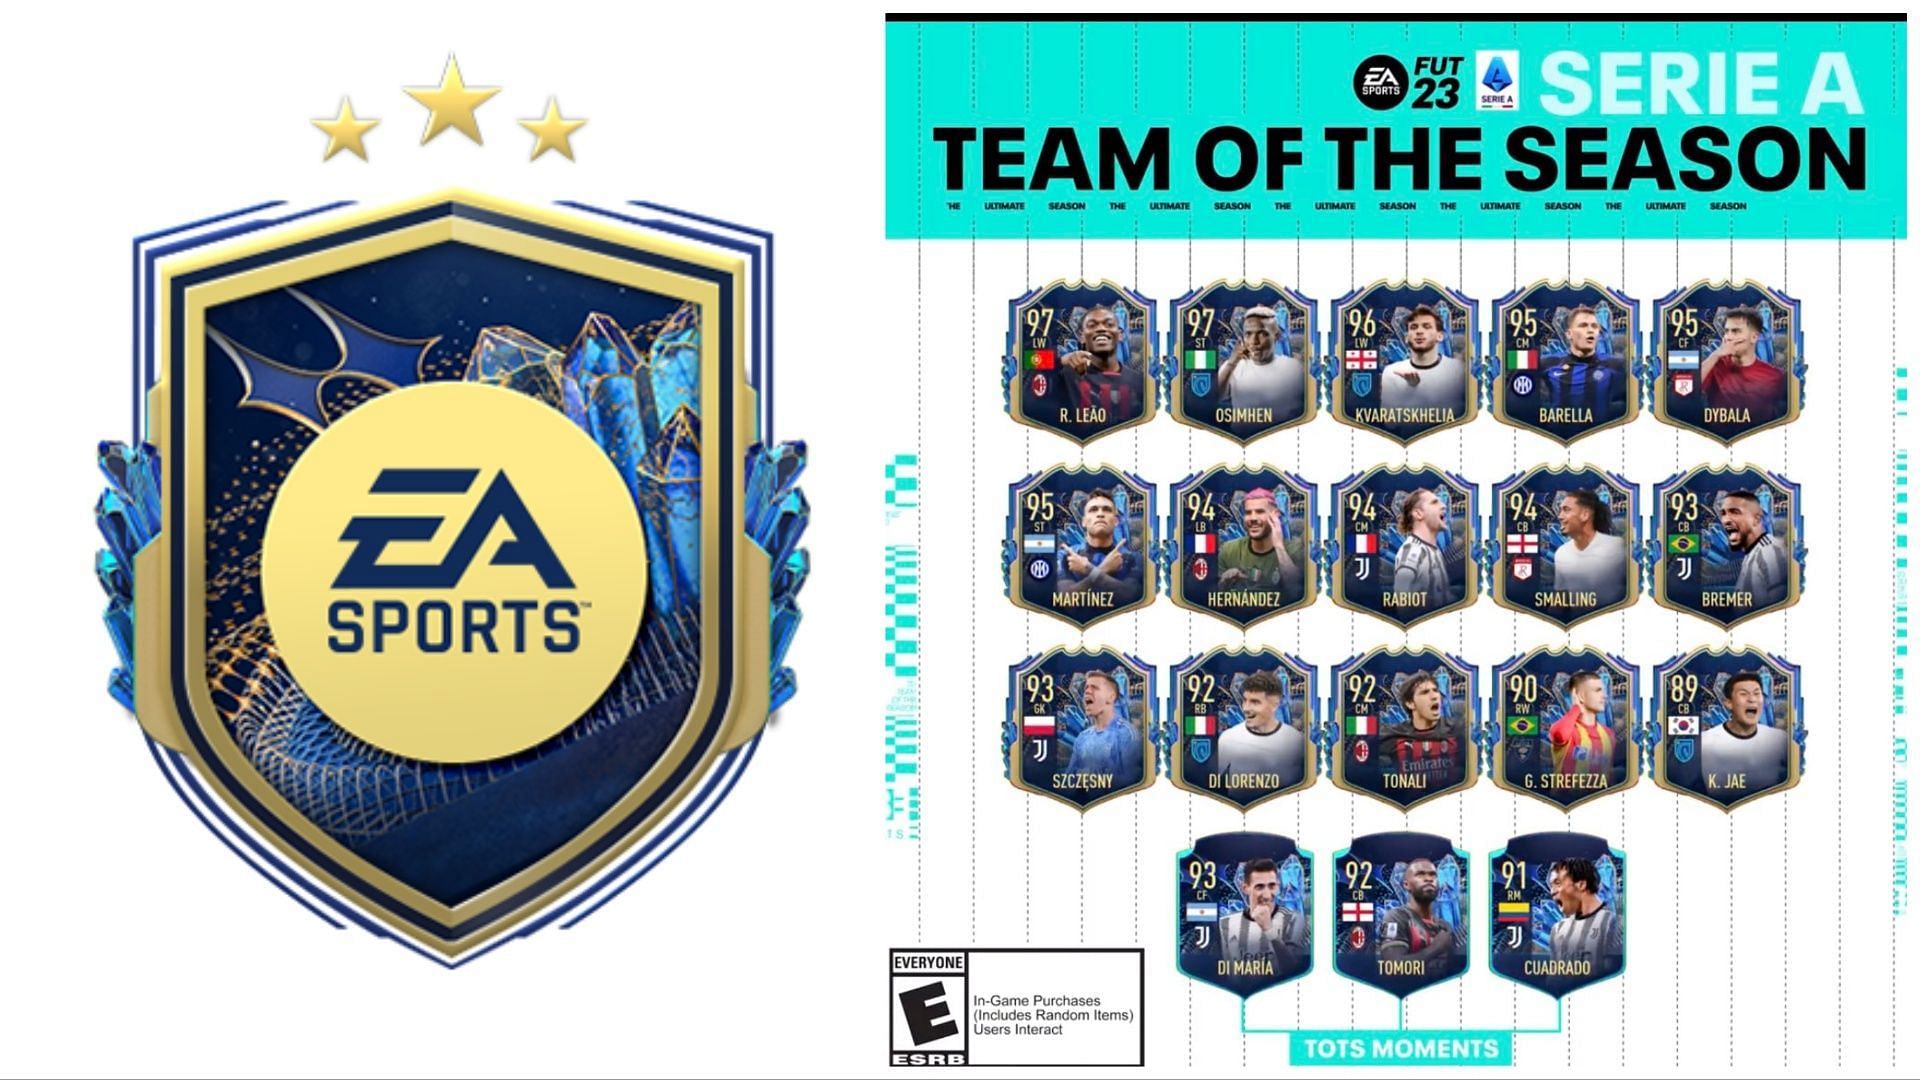 The latest TOTS Challenge is now live in FIFA 23 (Images via EA Sports)